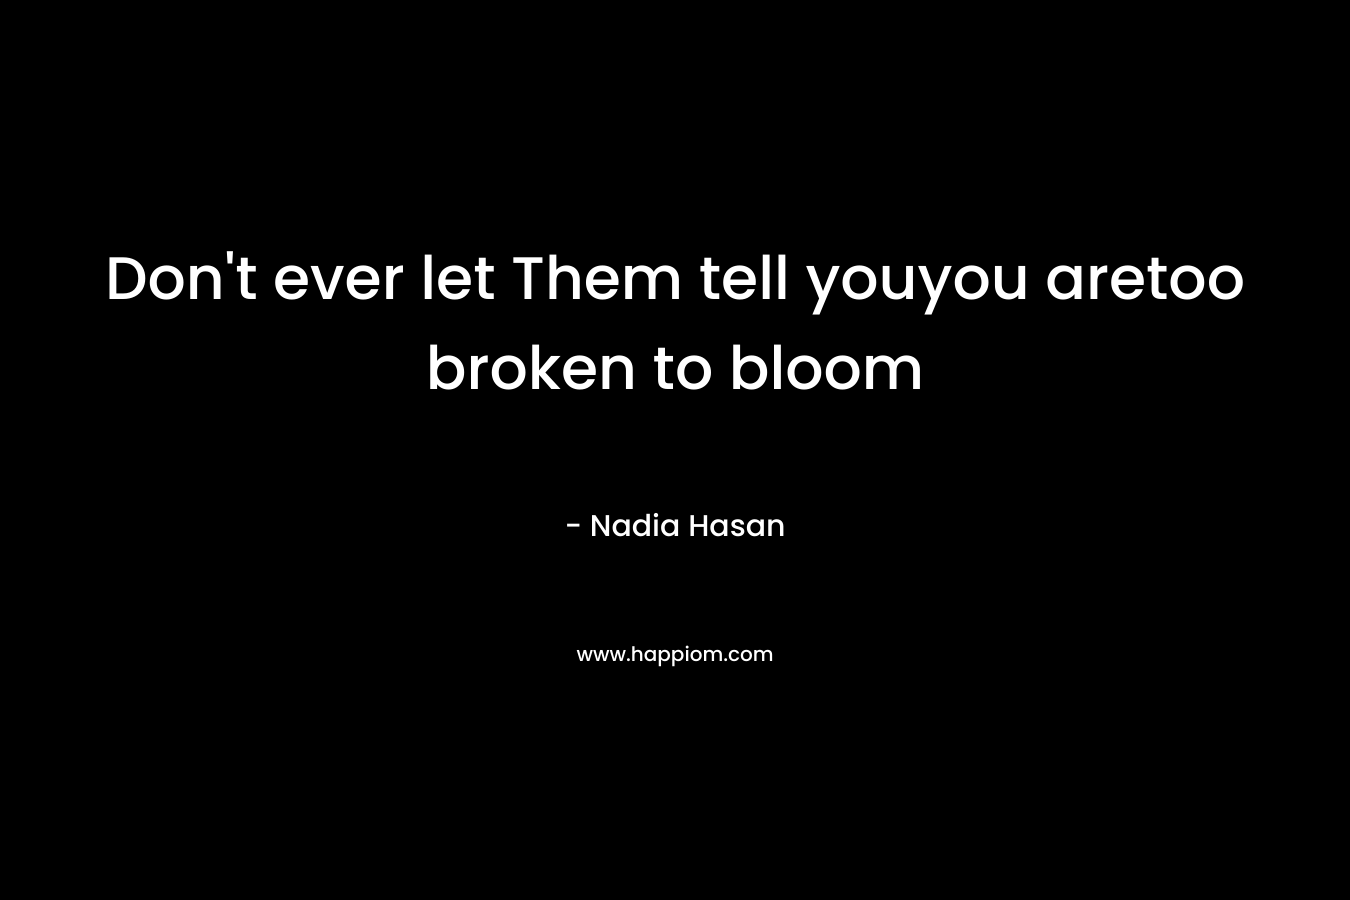 Don't ever let Them tell youyou aretoo broken to bloom